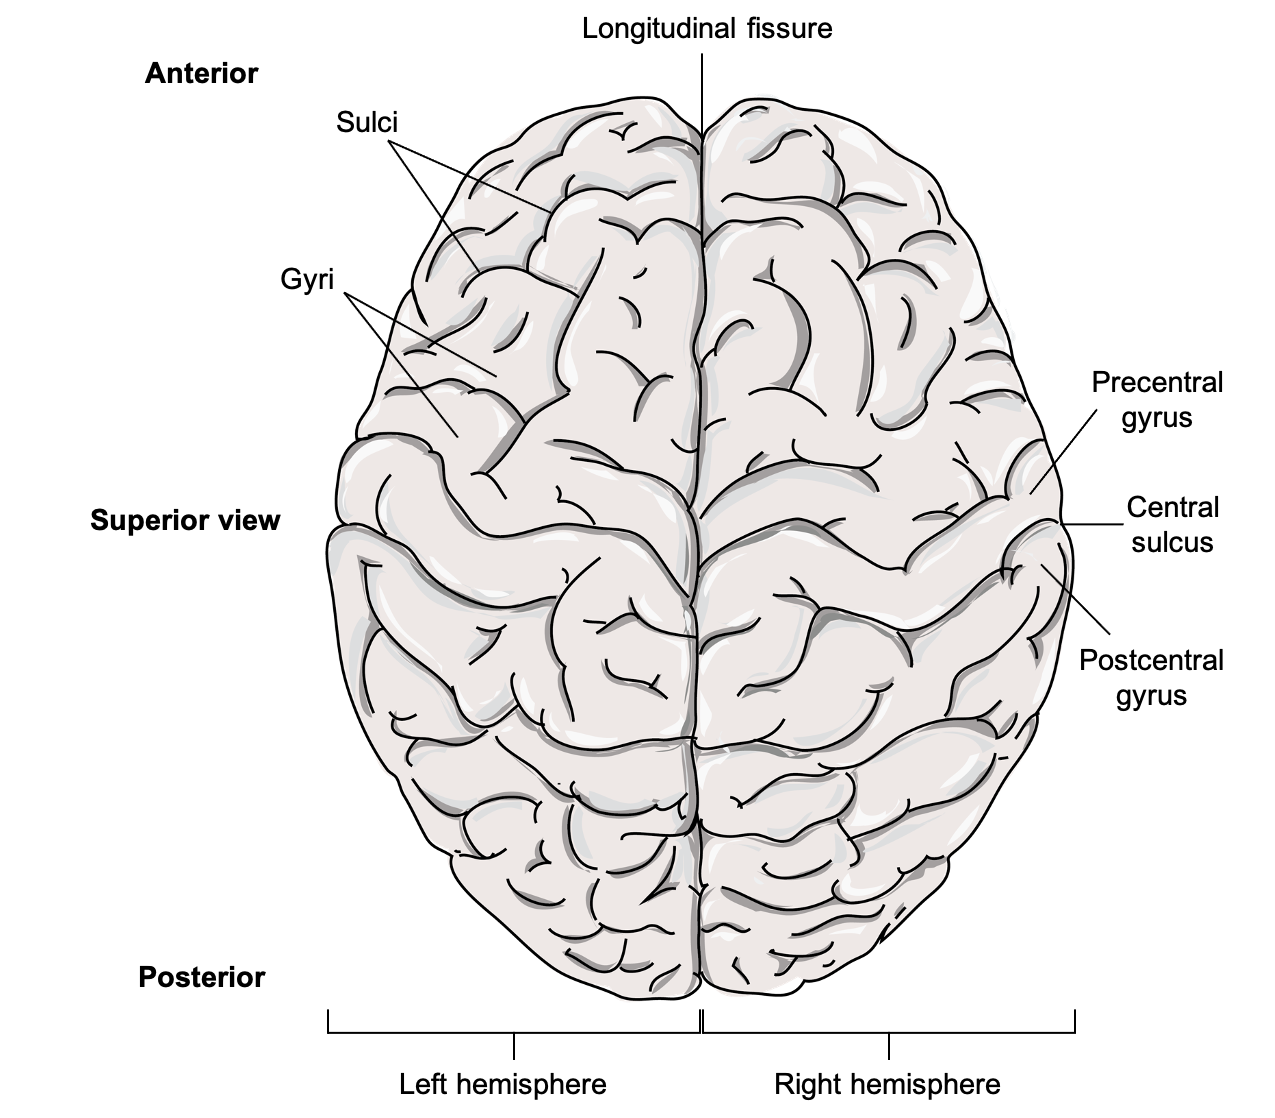 From a superior view, the brain is shaped like a wrinkly grape and cut in half along the long side.